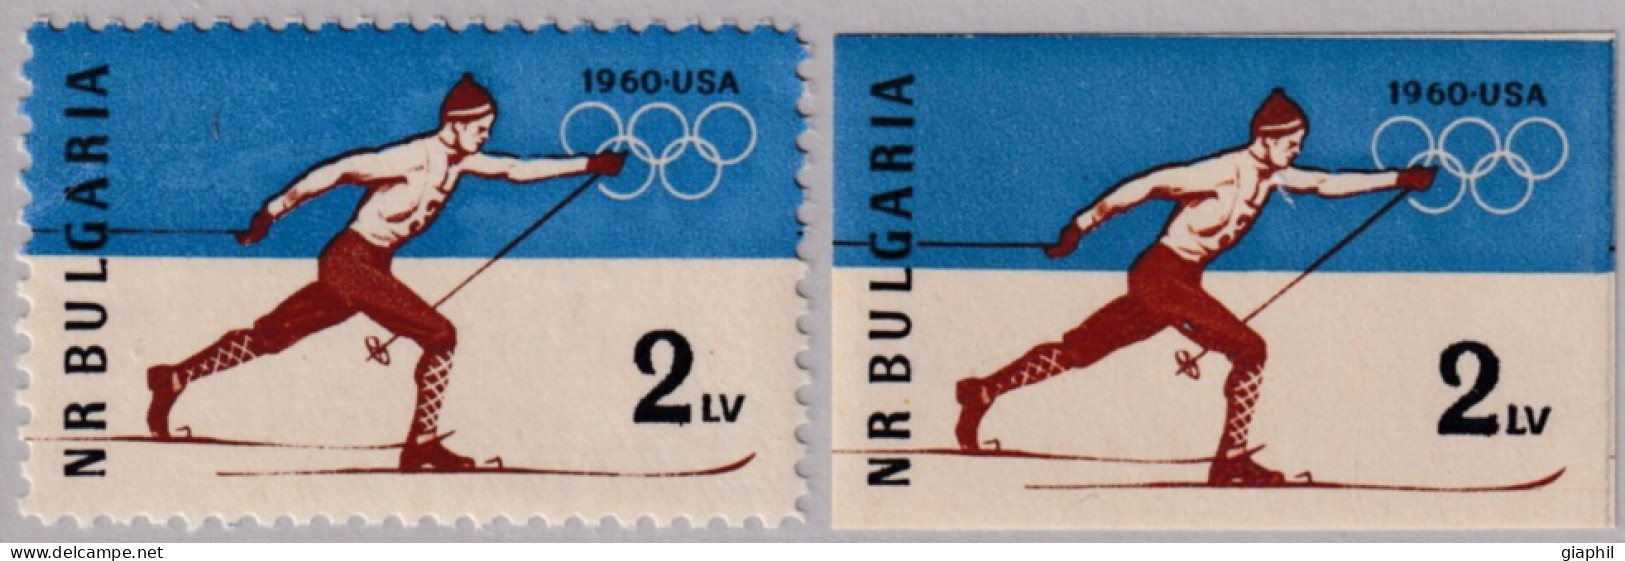 BULGARIA BULGARIE 1960 SQUAW VALLEY OLYMPIC GAMES SET (Mi 1152A-1152B) MNH ** OFFER! - Invierno 1960: Squaw Valley